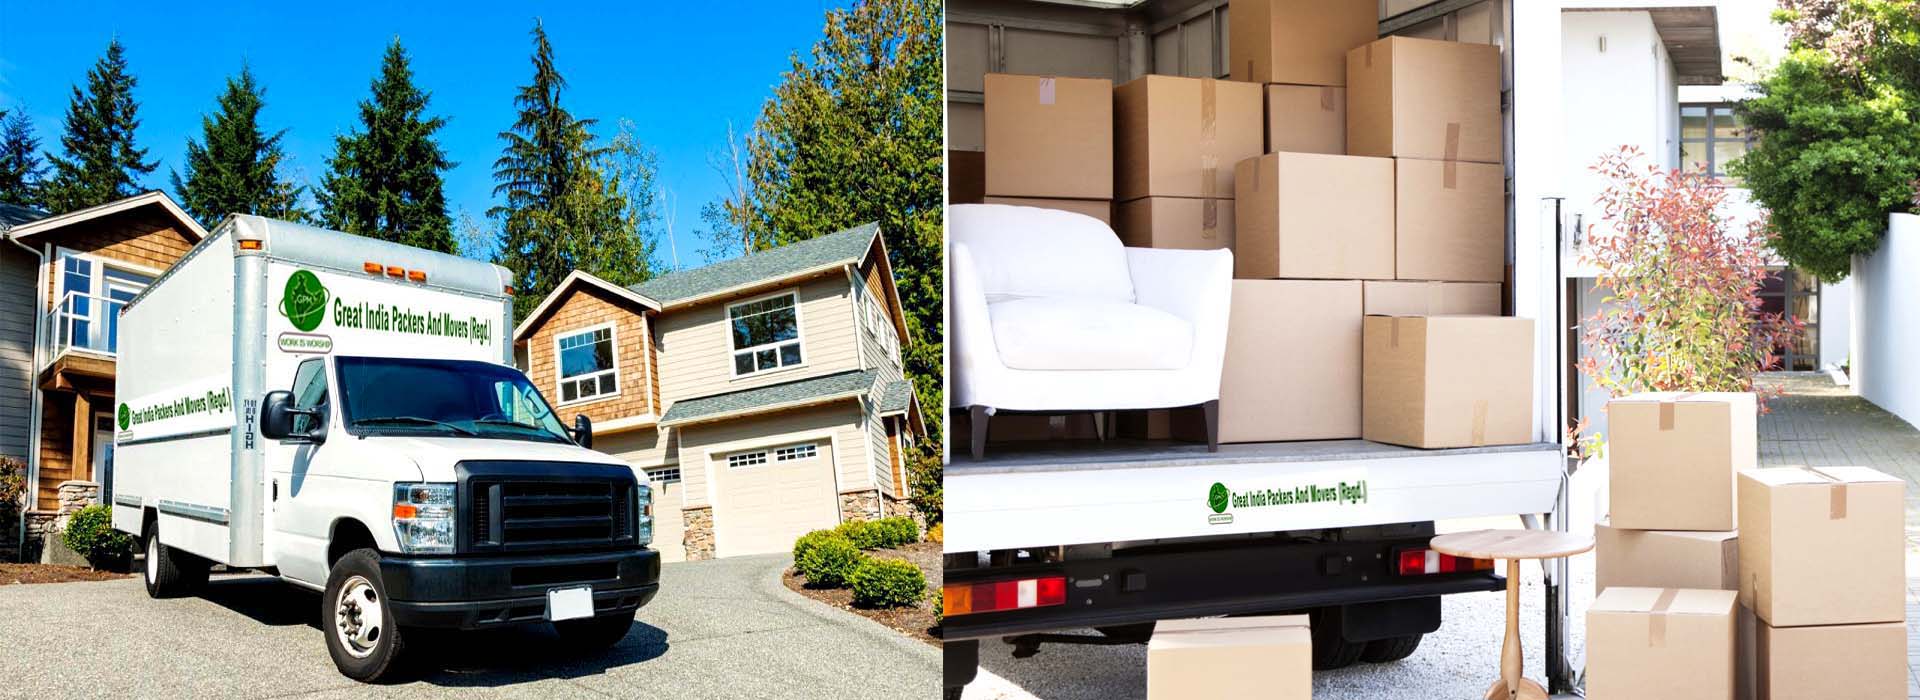 packers and movers slide1